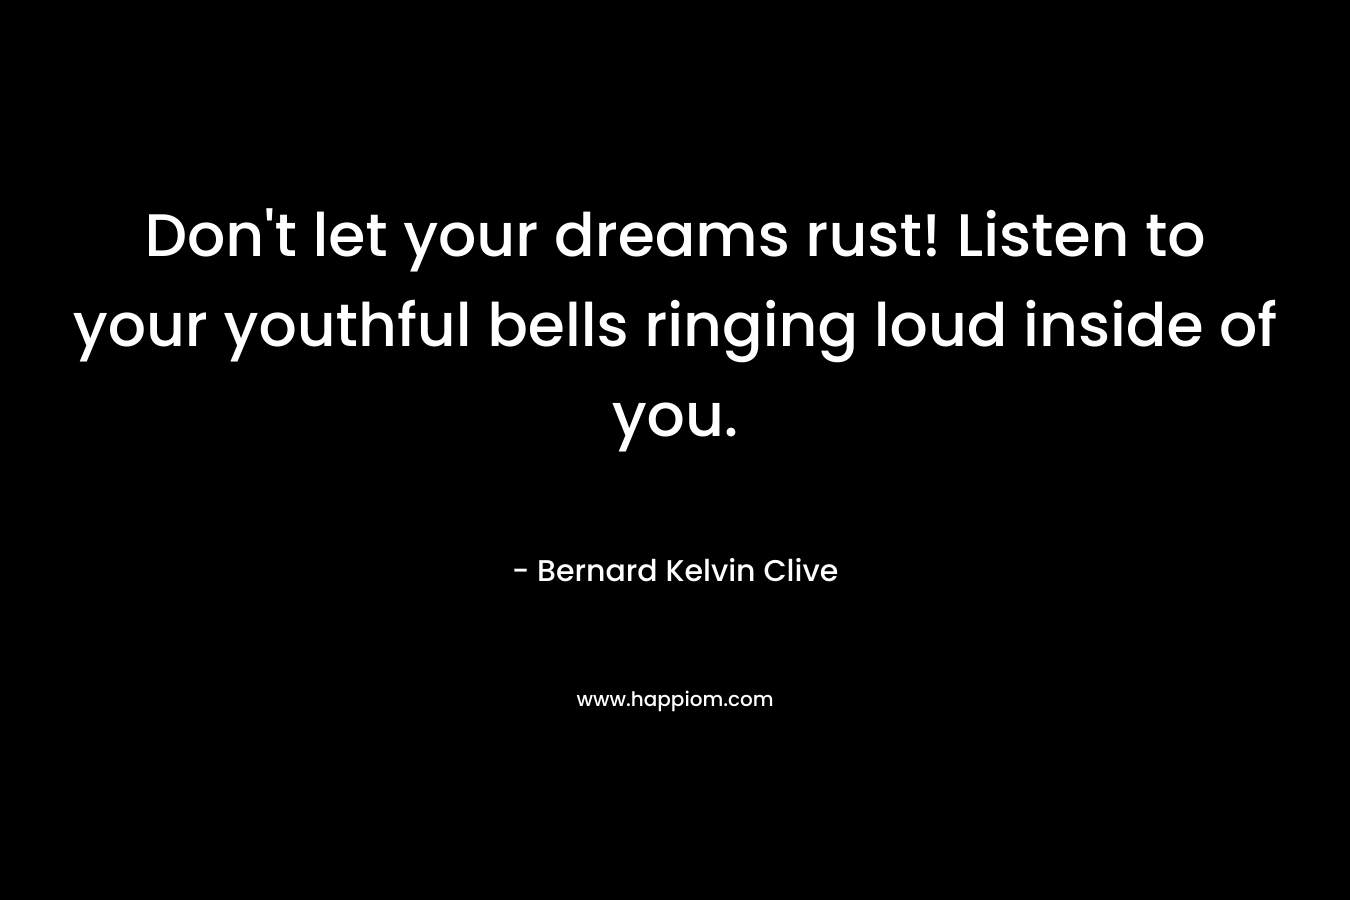 Don't let your dreams rust! Listen to your youthful bells ringing loud inside of you.